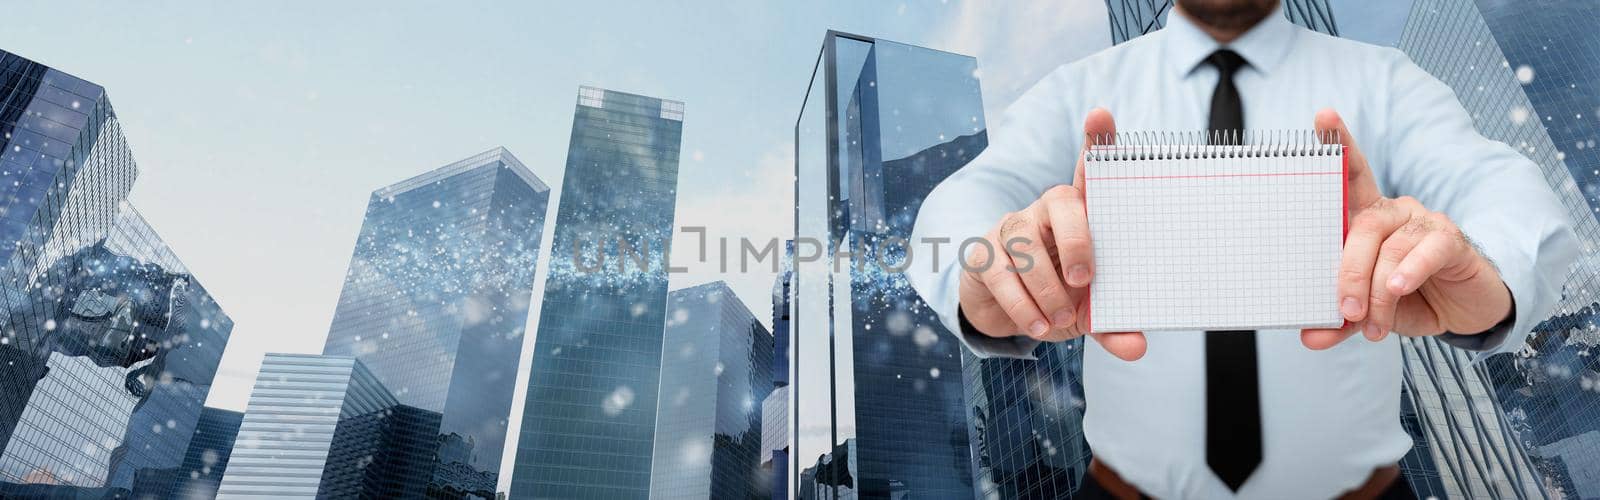 Businessman Holding Empty Page Graphing Notebook With His Both Hands Around Futuristic Technology. Employee Presenting Blank Workbook Surrounded By Modern Automation. by nialowwa